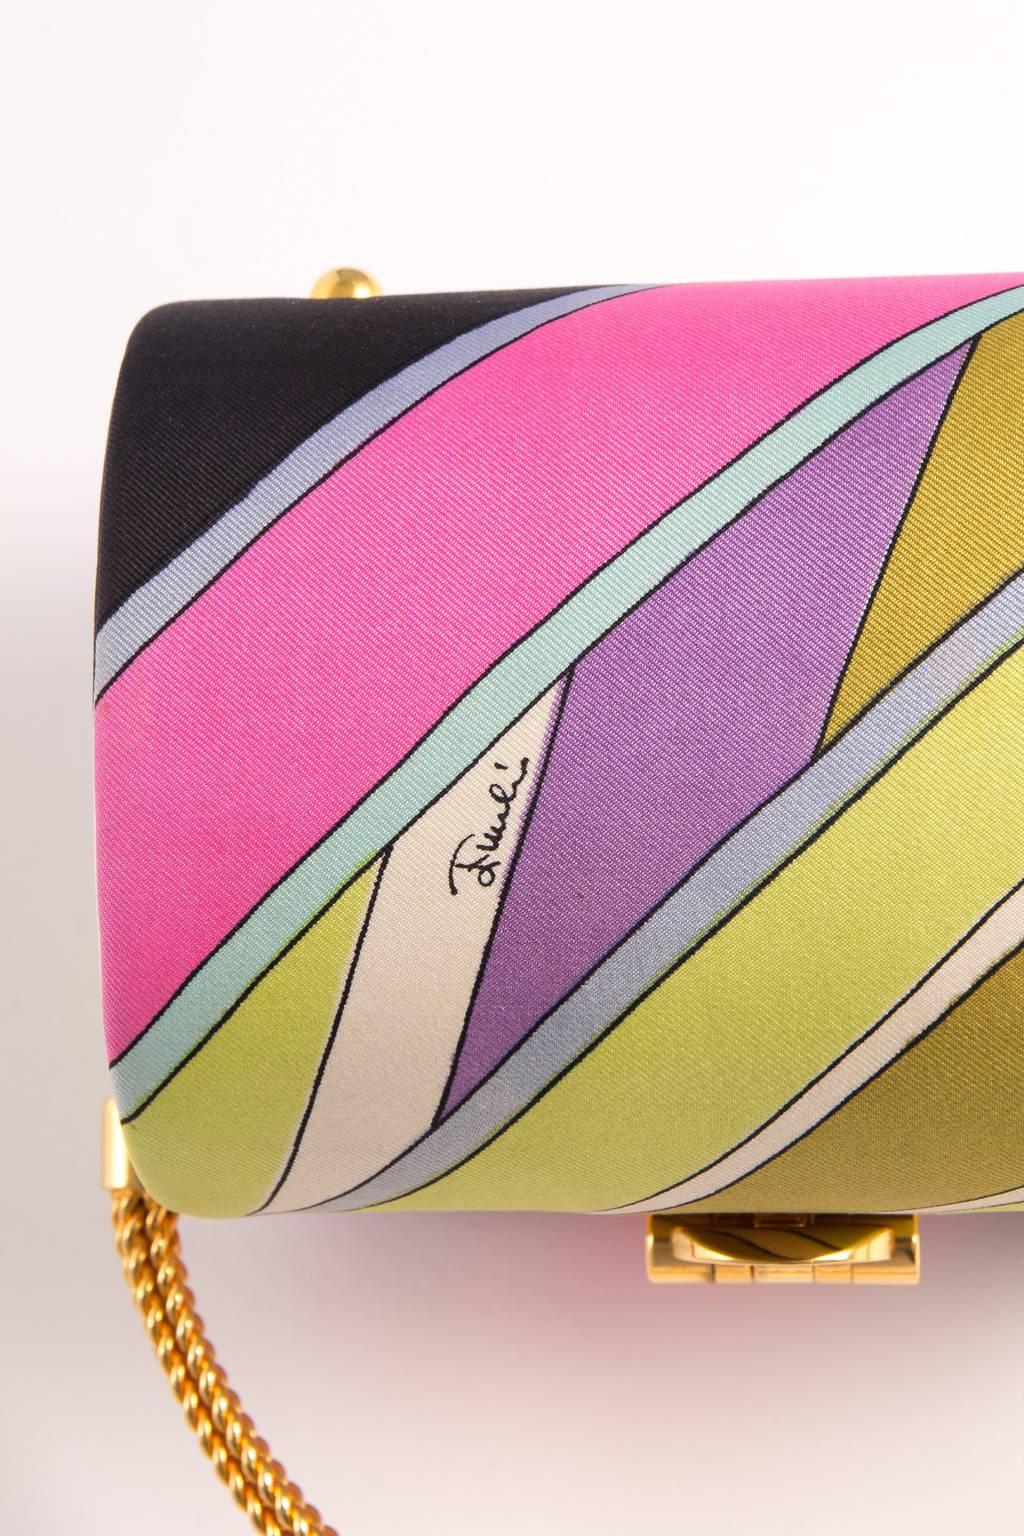 vintage emilio pucci hard case 'box' purse by funky finders 4